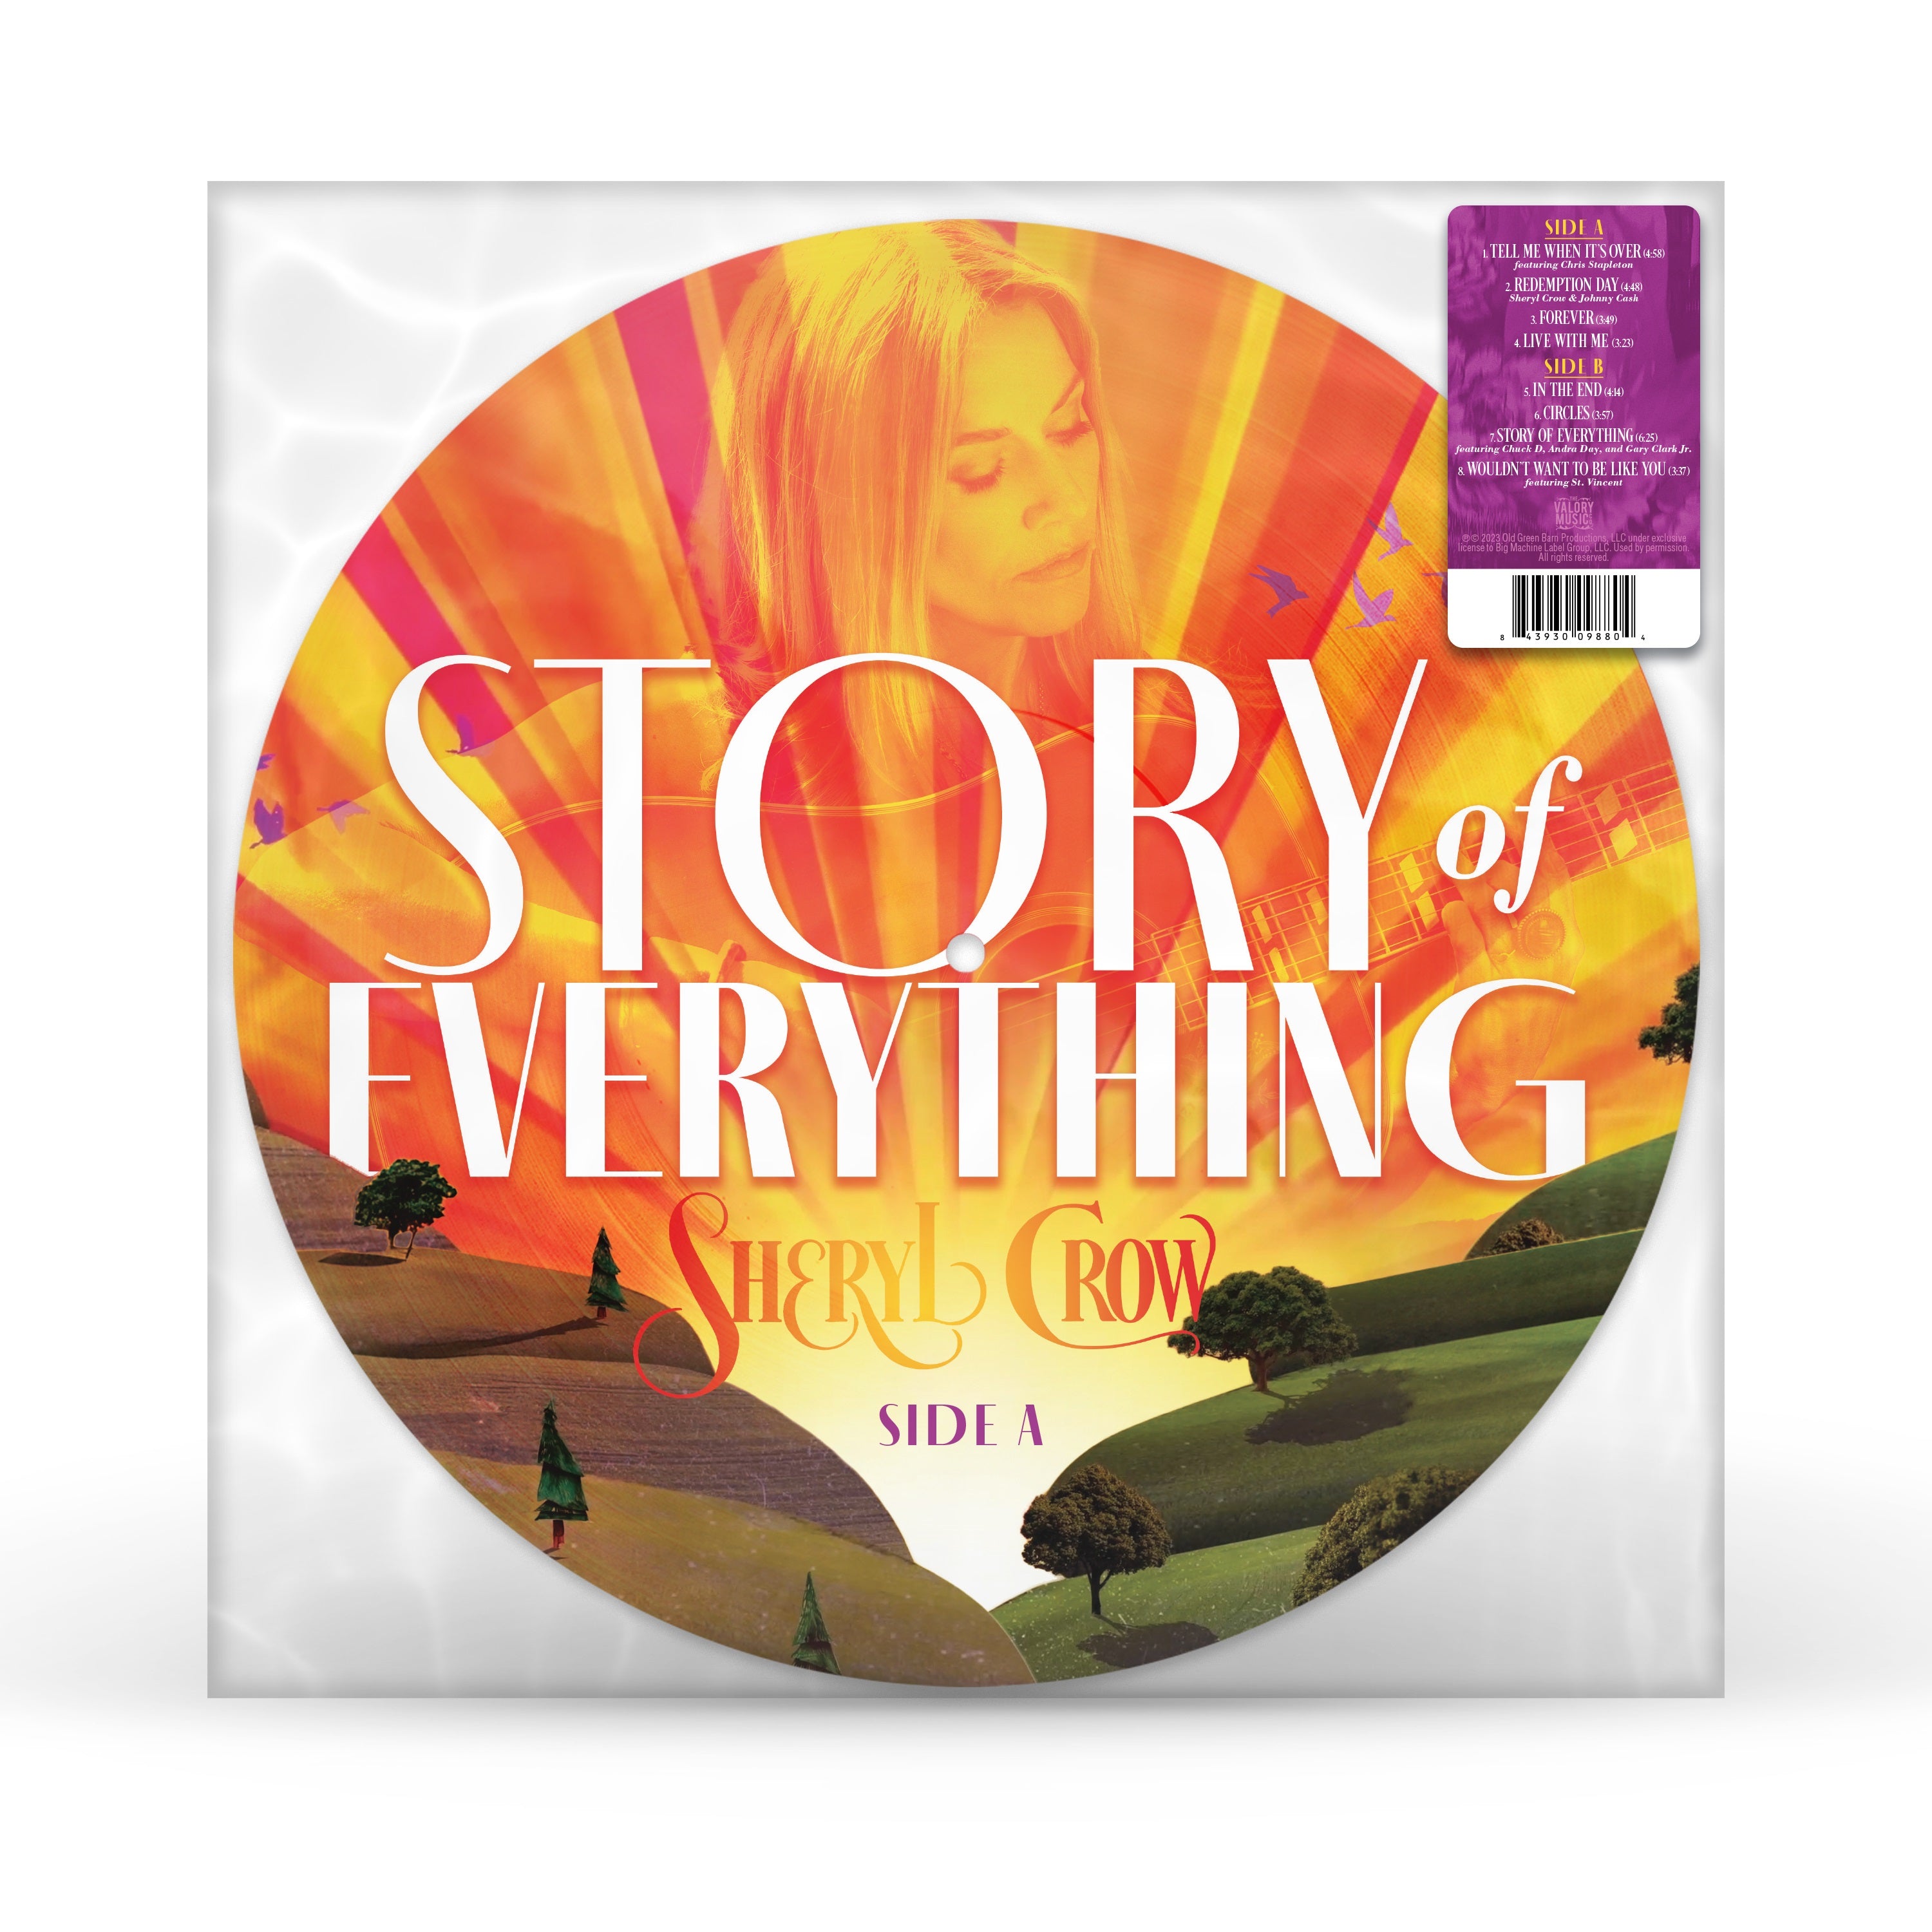 Sheryl Crow | Story Of Everything [Picture Disc LP] | Vinyl